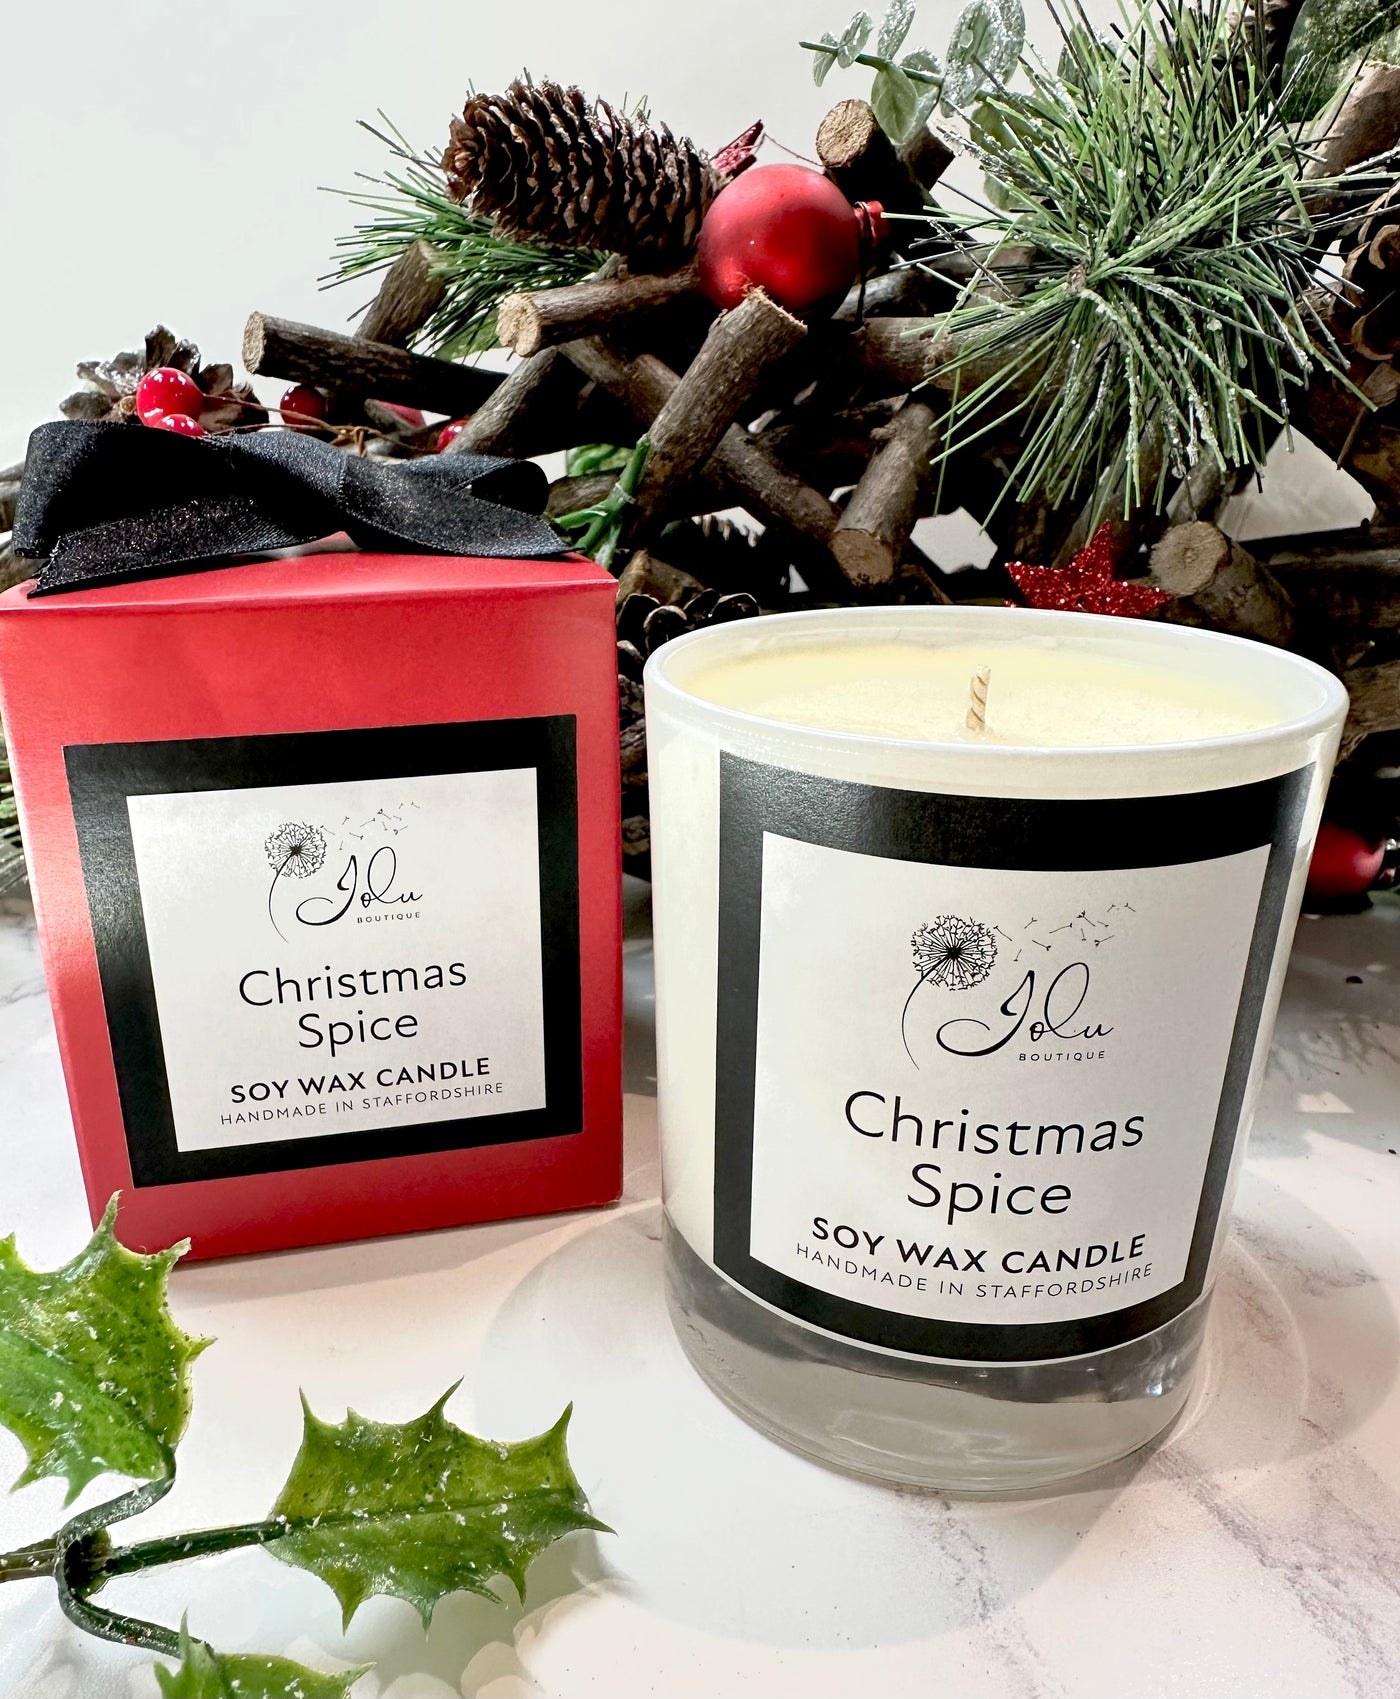 Jolu Boutique Christmas Spice Soy Wax Candle